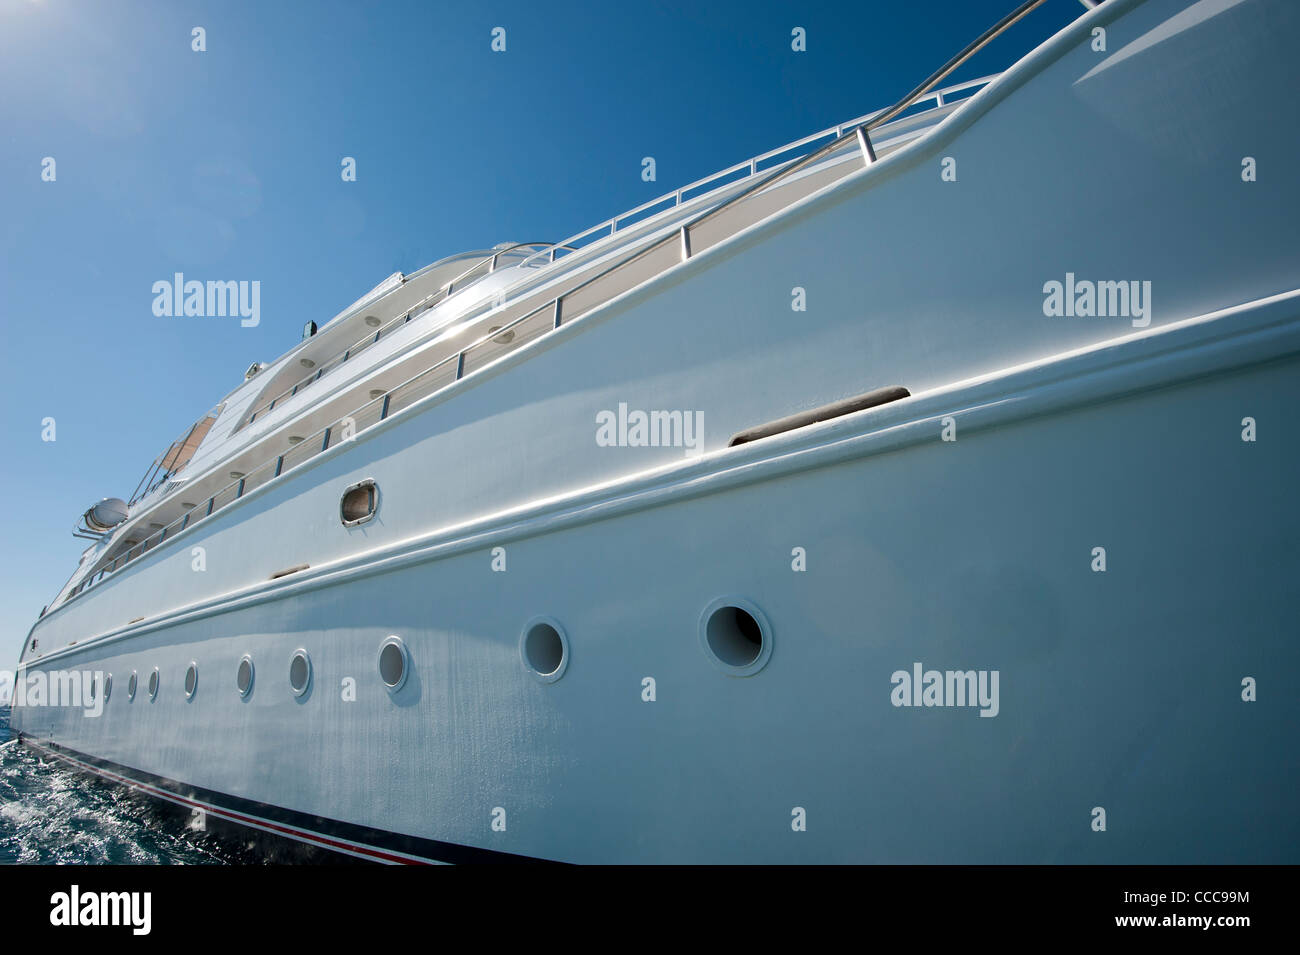 Hull of a large luxury motor yacht at sea Stock Photo